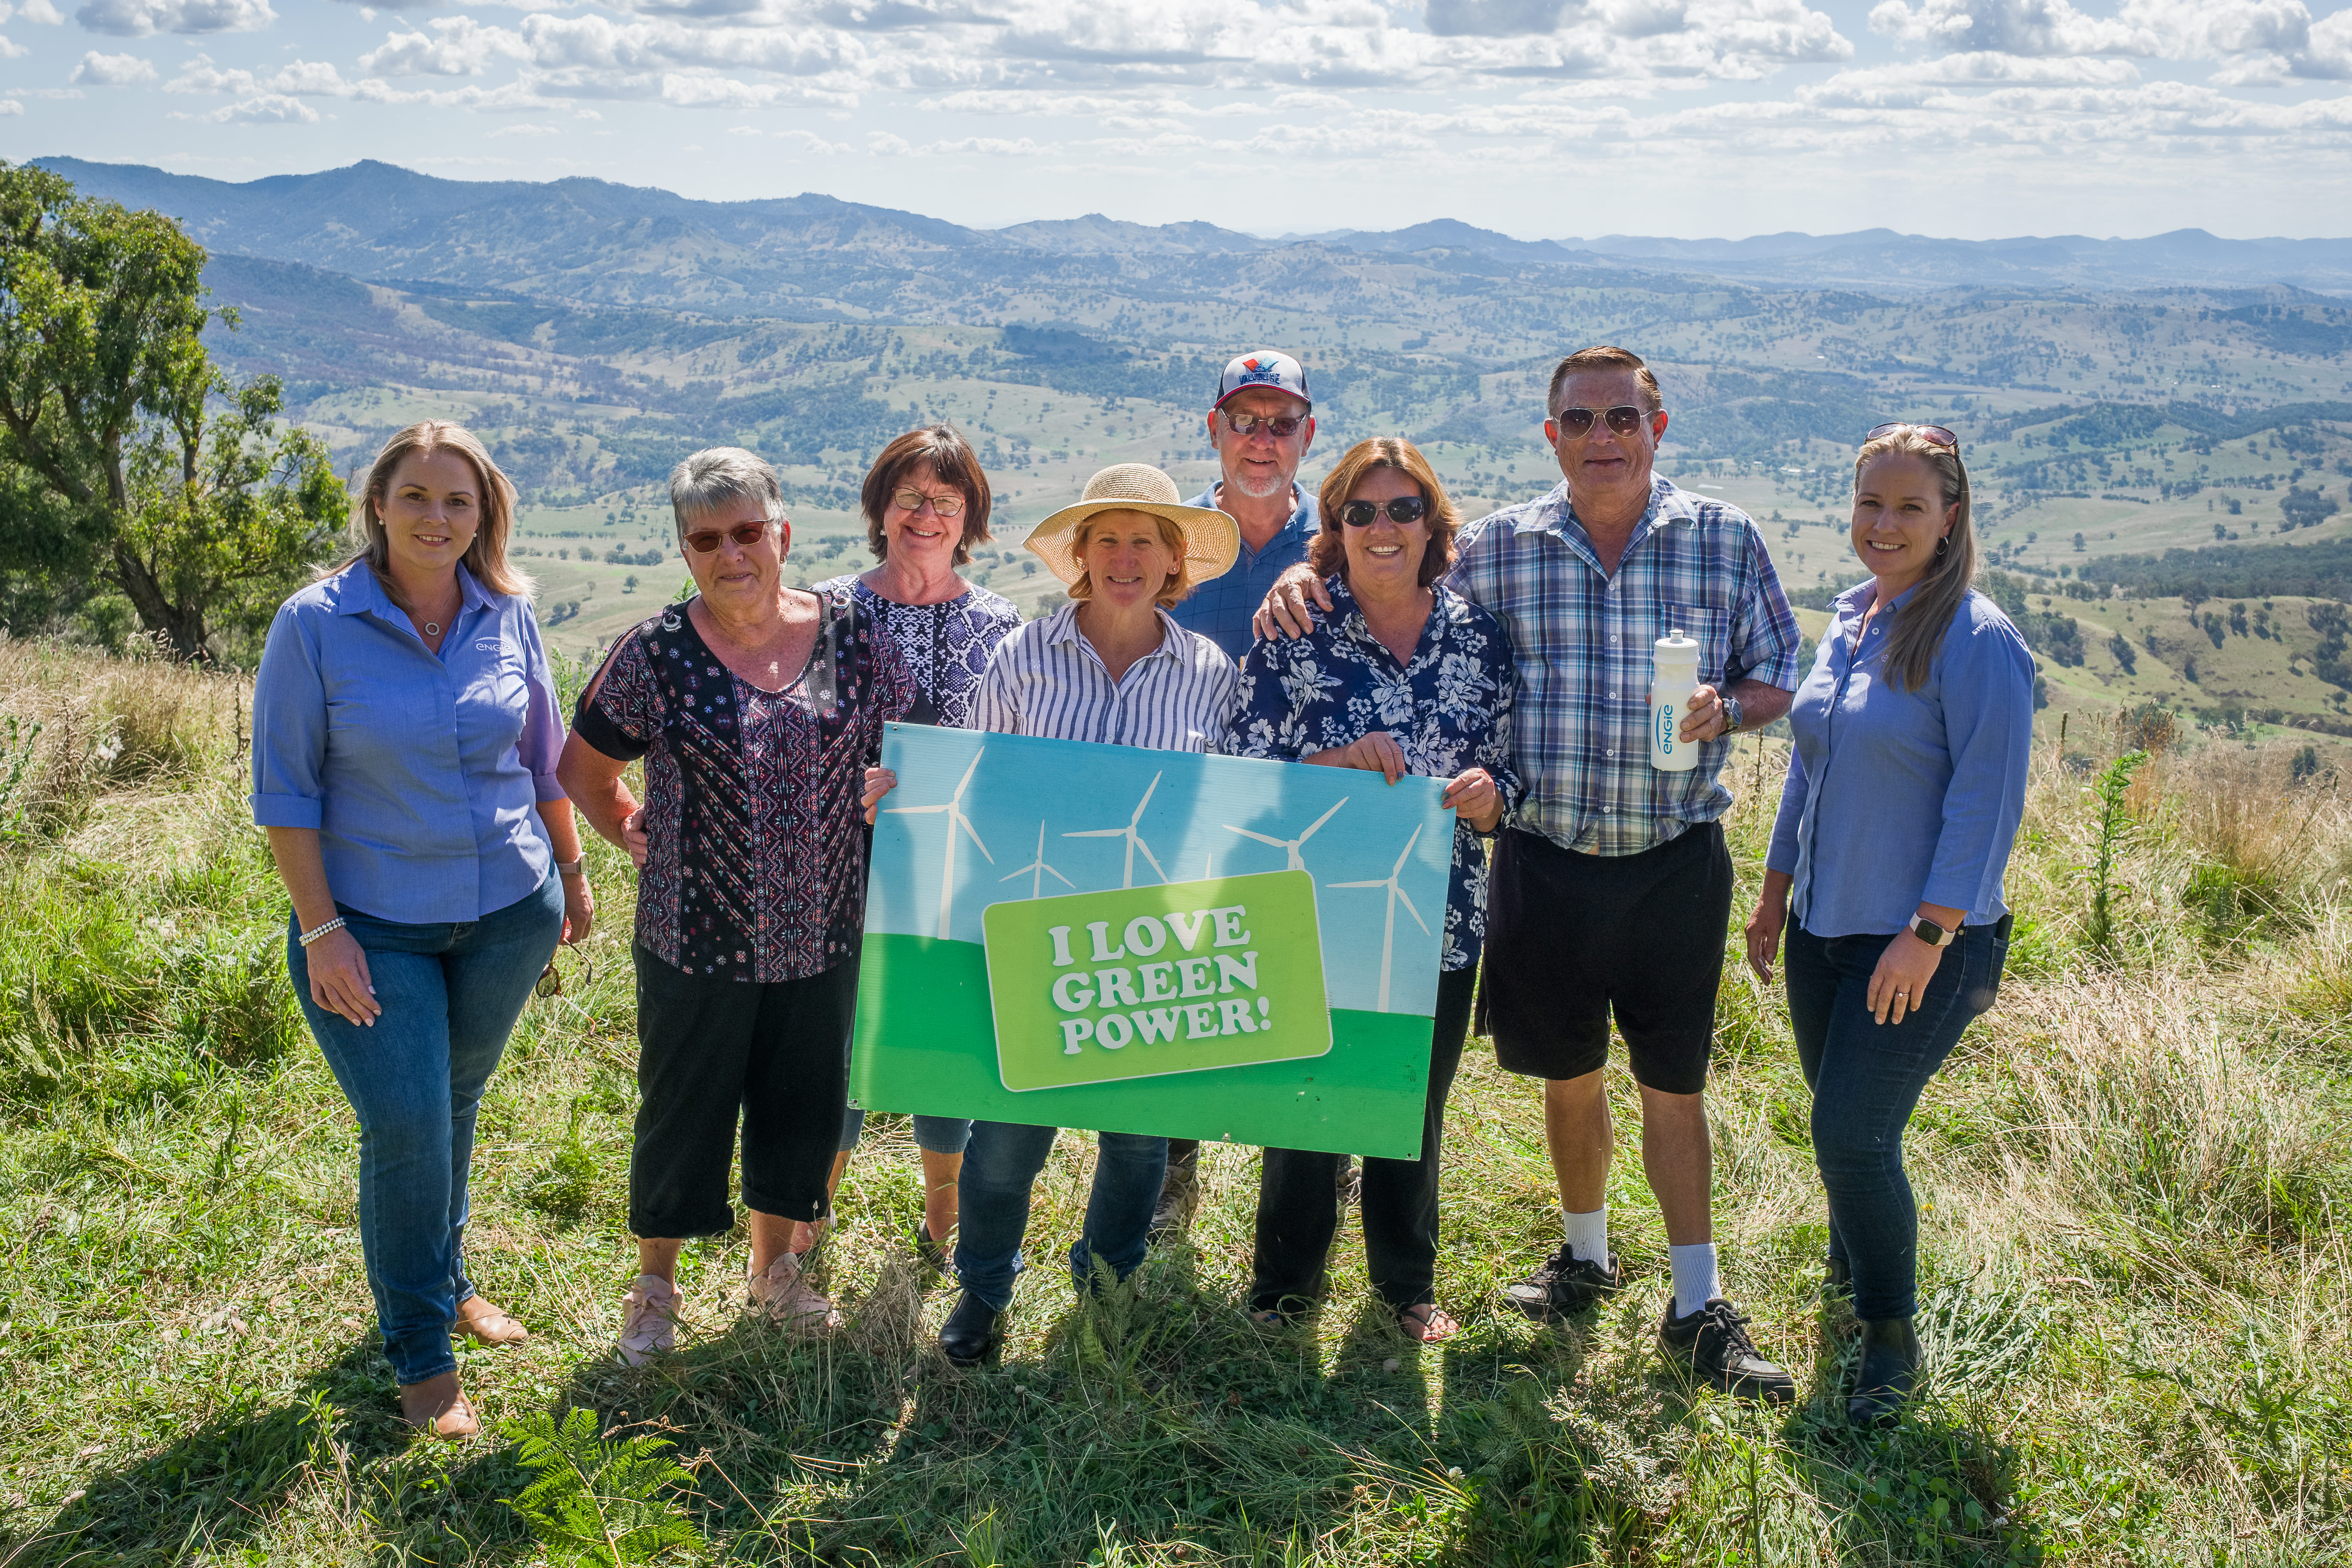 Group of happy, smiling community members holding an 'I love green power' sign. View of mountains in the background